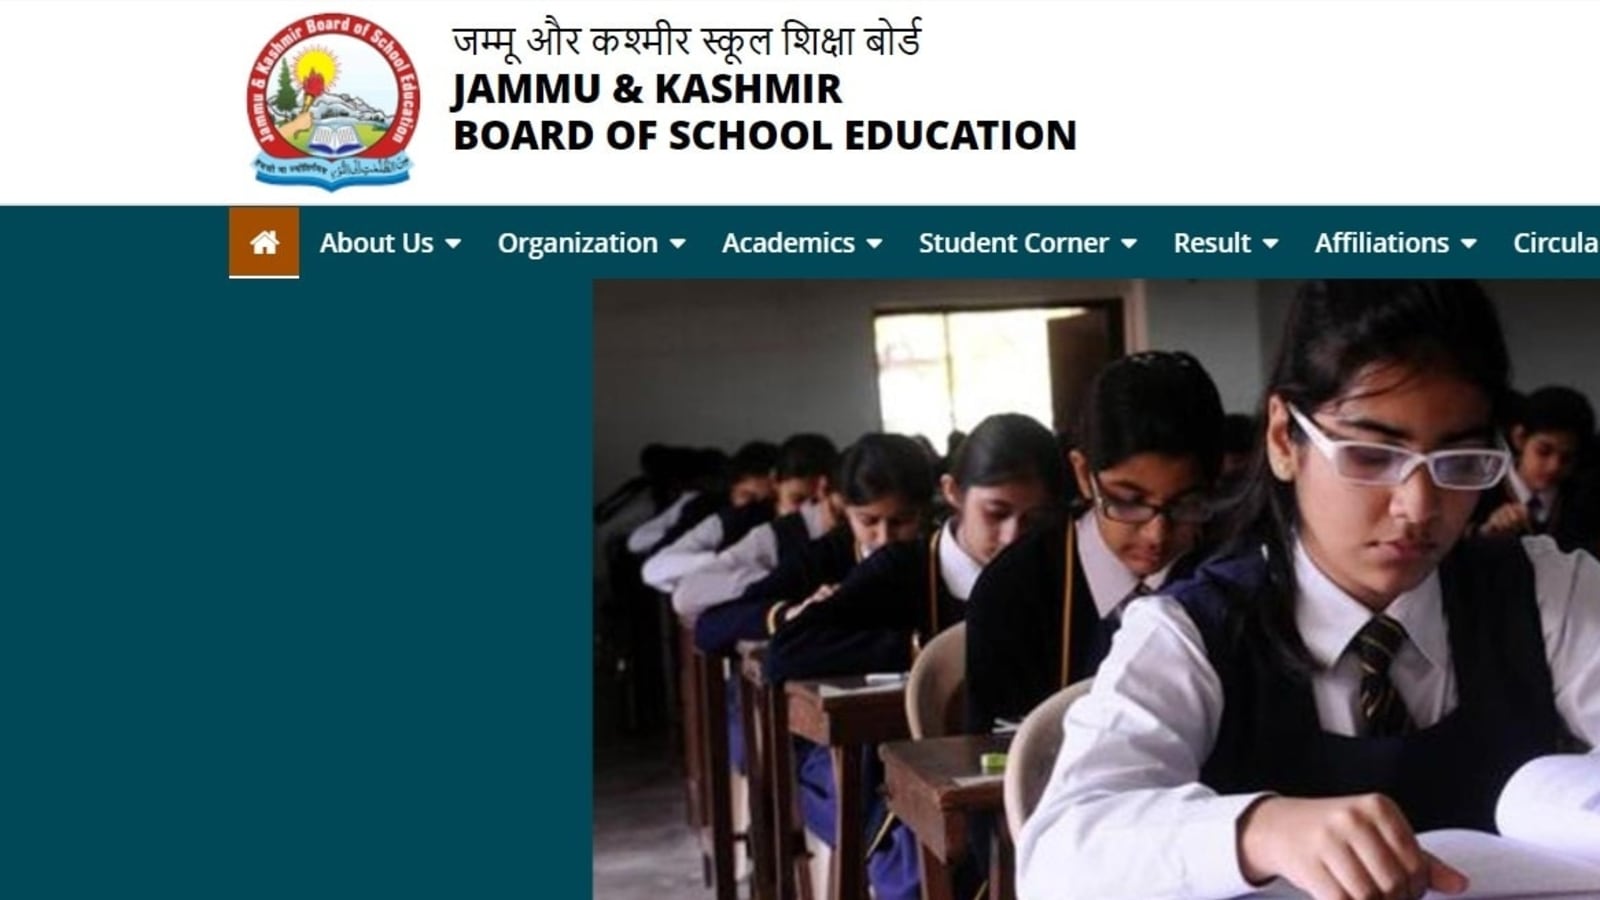 JKBOSE 12th result declared for Kashmir division, here's direct link to check